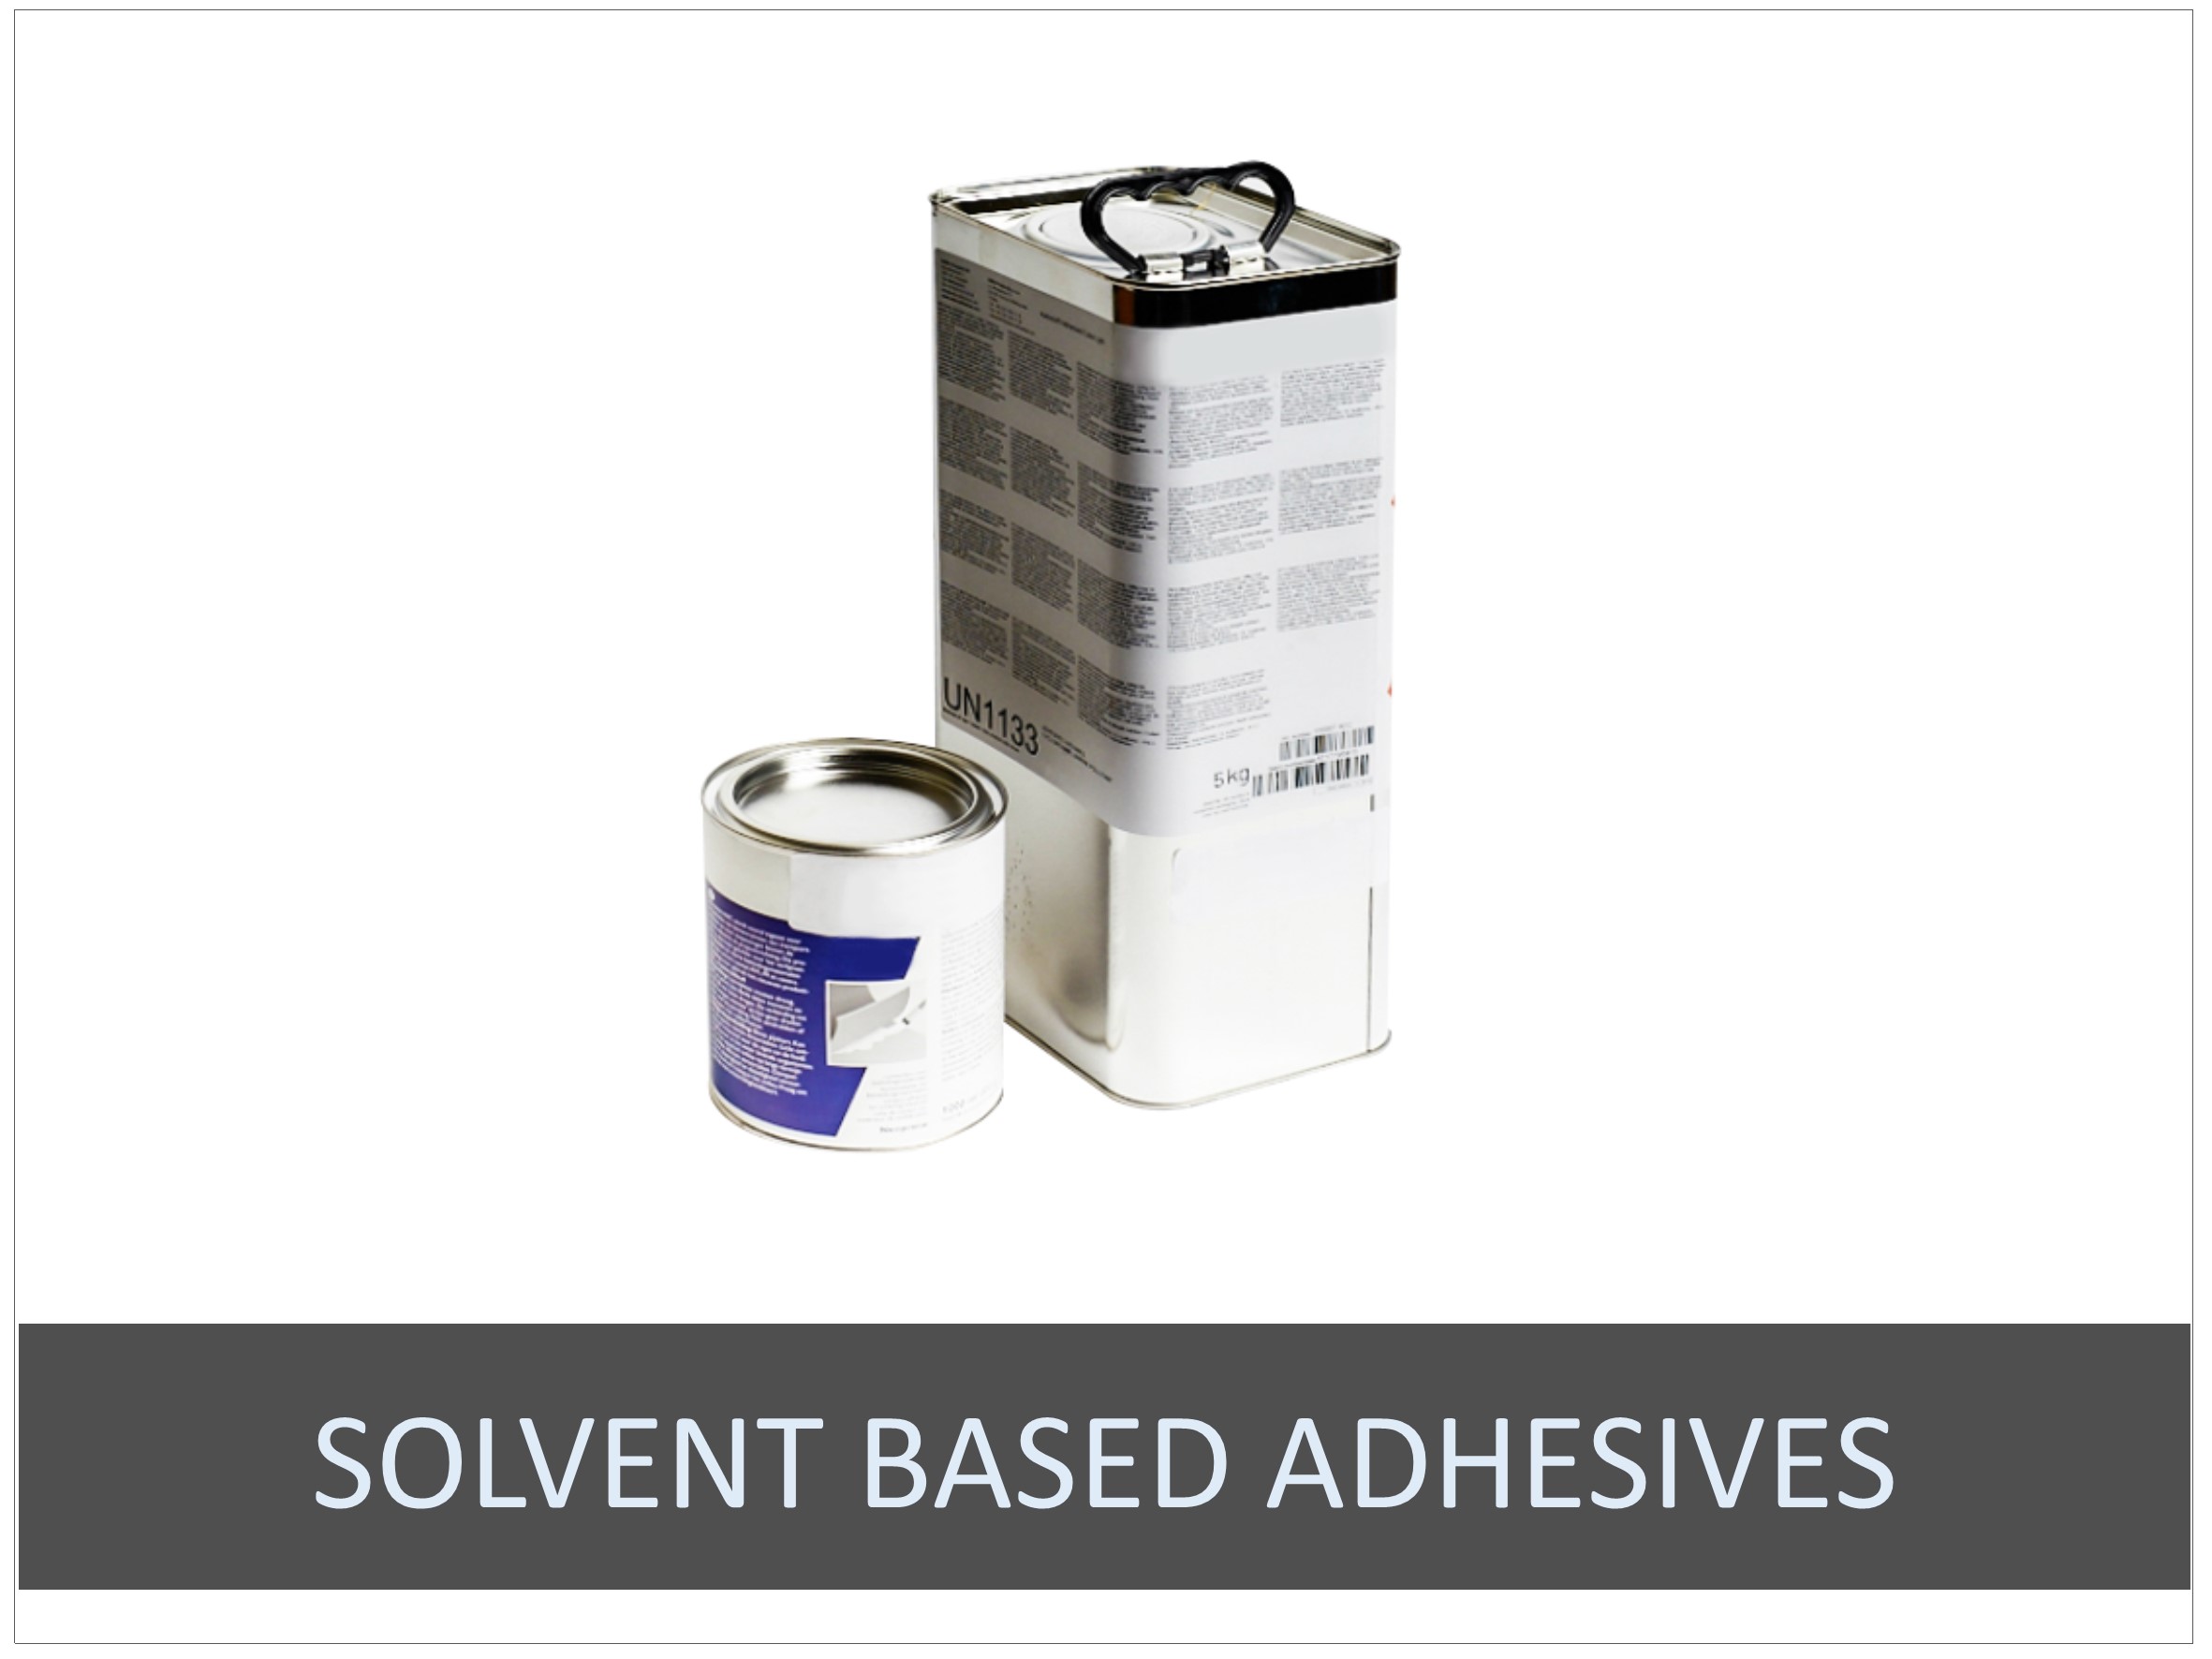 Solvent based adhesives